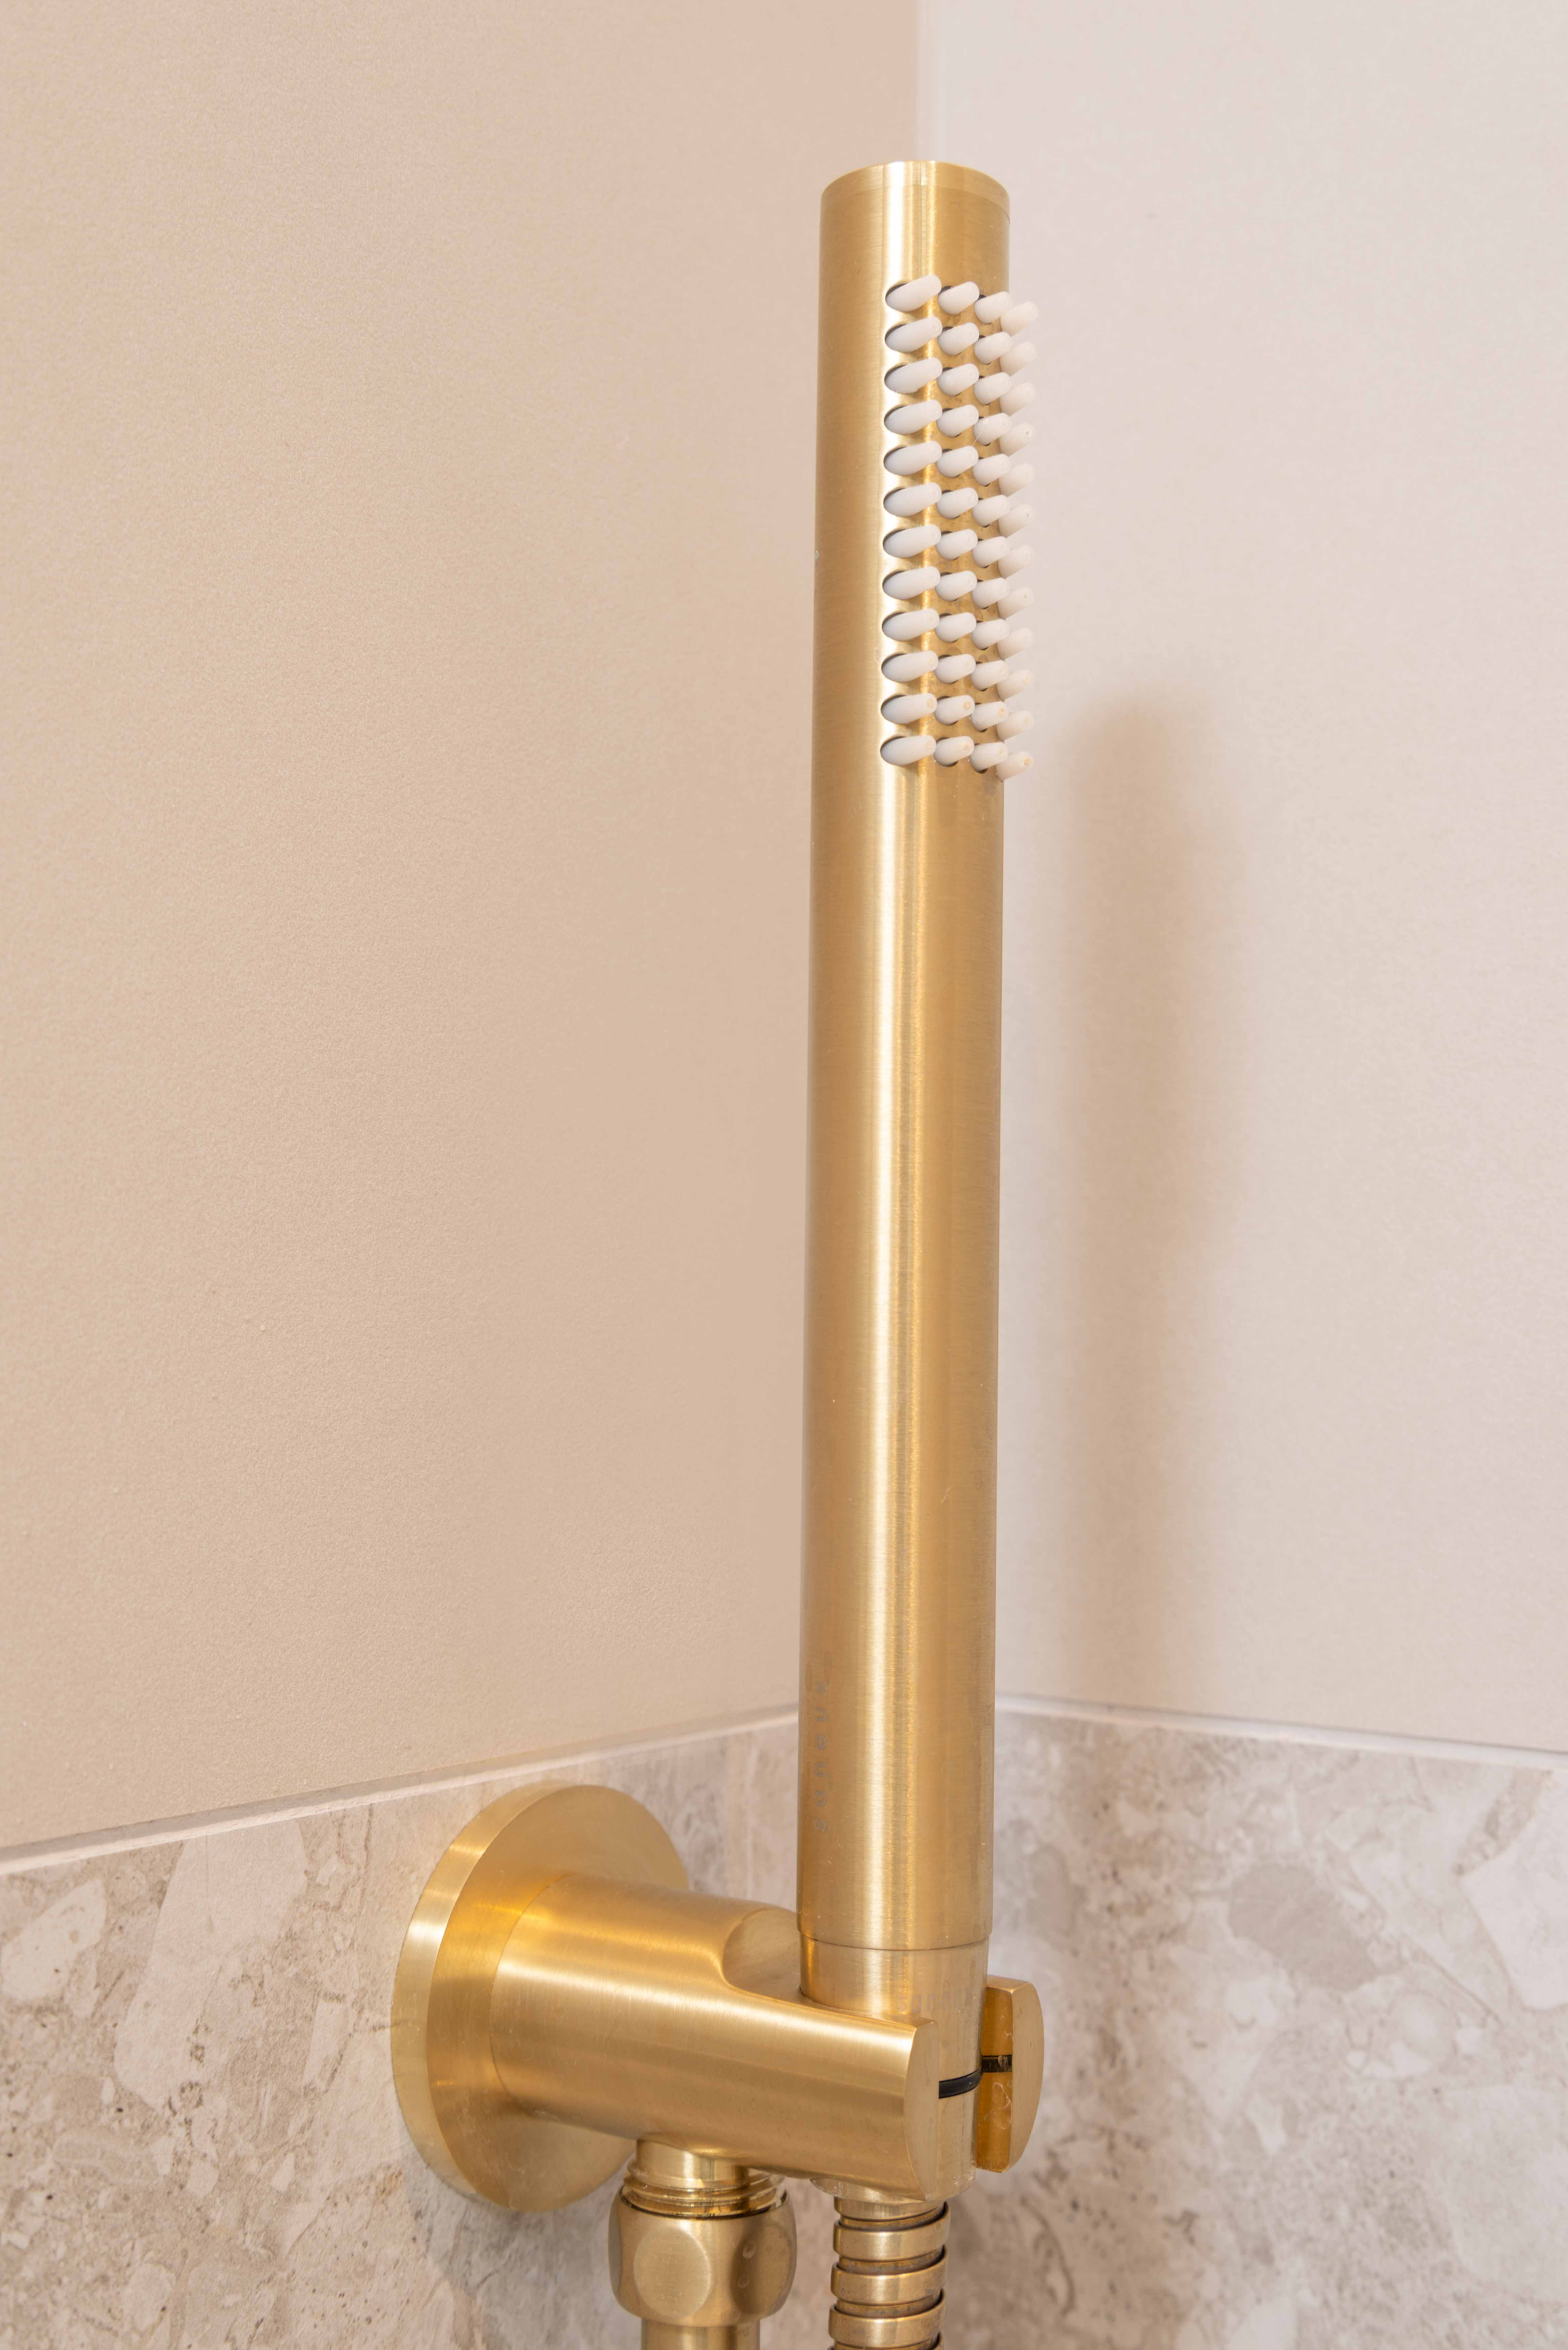 Saneux Cos shower handset brushed brass at Rubric Apartments, Whetstone